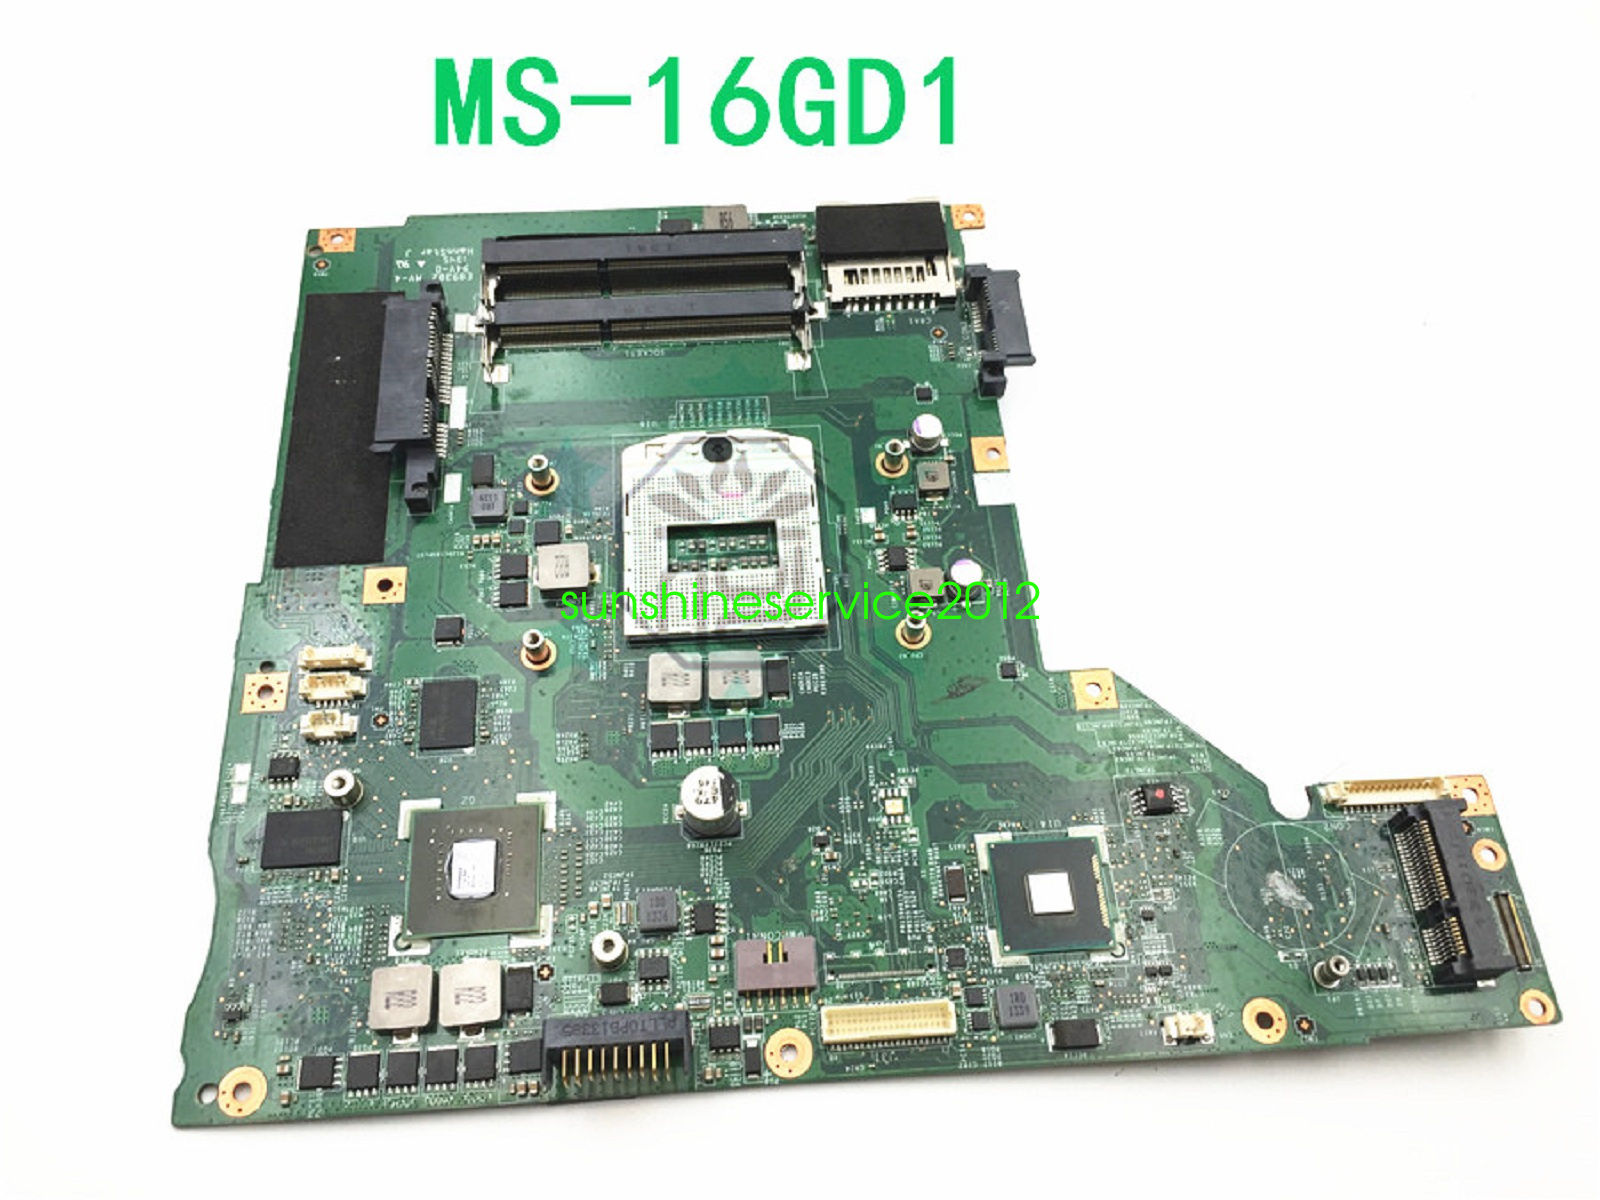 MSI CX61 CX60 Laptop Intel Motherboard MS-16GD1 VER: 1.1 Tested - Click Image to Close